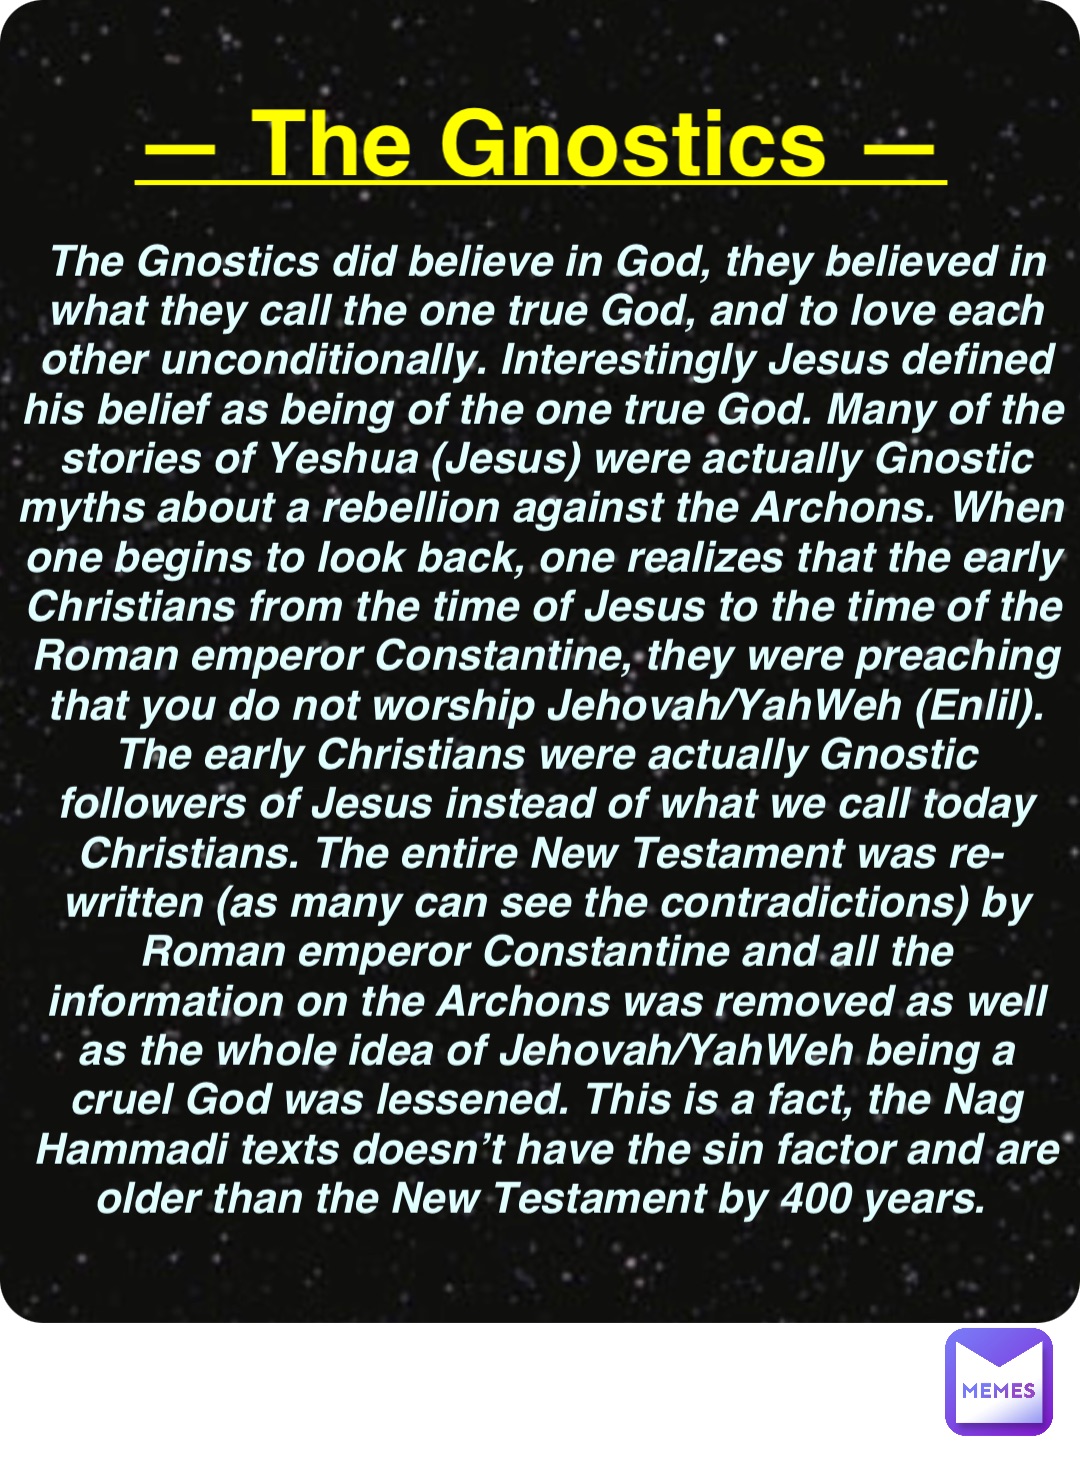 Double tap to edit — The Gnostics — The Gnostics did believe in God, they believed in what they call the one true God, and to love each other unconditionally. Interestingly Jesus defined his belief as being of the one true God. Many of the stories of Yeshua (Jesus) were actually Gnostic myths about a rebellion against the Archons. When one begins to look back, one realizes that the early Christians from the time of Jesus to the time of the Roman emperor Constantine, they were preaching that you do not worship Jehovah/YahWeh (Enlil). The early Christians were actually Gnostic followers of Jesus instead of what we call today Christians. The entire New Testament was re-written (as many can see the contradictions) by Roman emperor Constantine and all the information on the Archons was removed as well as the whole idea of Jehovah/YahWeh being a cruel God was lessened. This is a fact, the Nag Hammadi texts doesn’t have the sin factor and are older than the New Testament by 400 years.